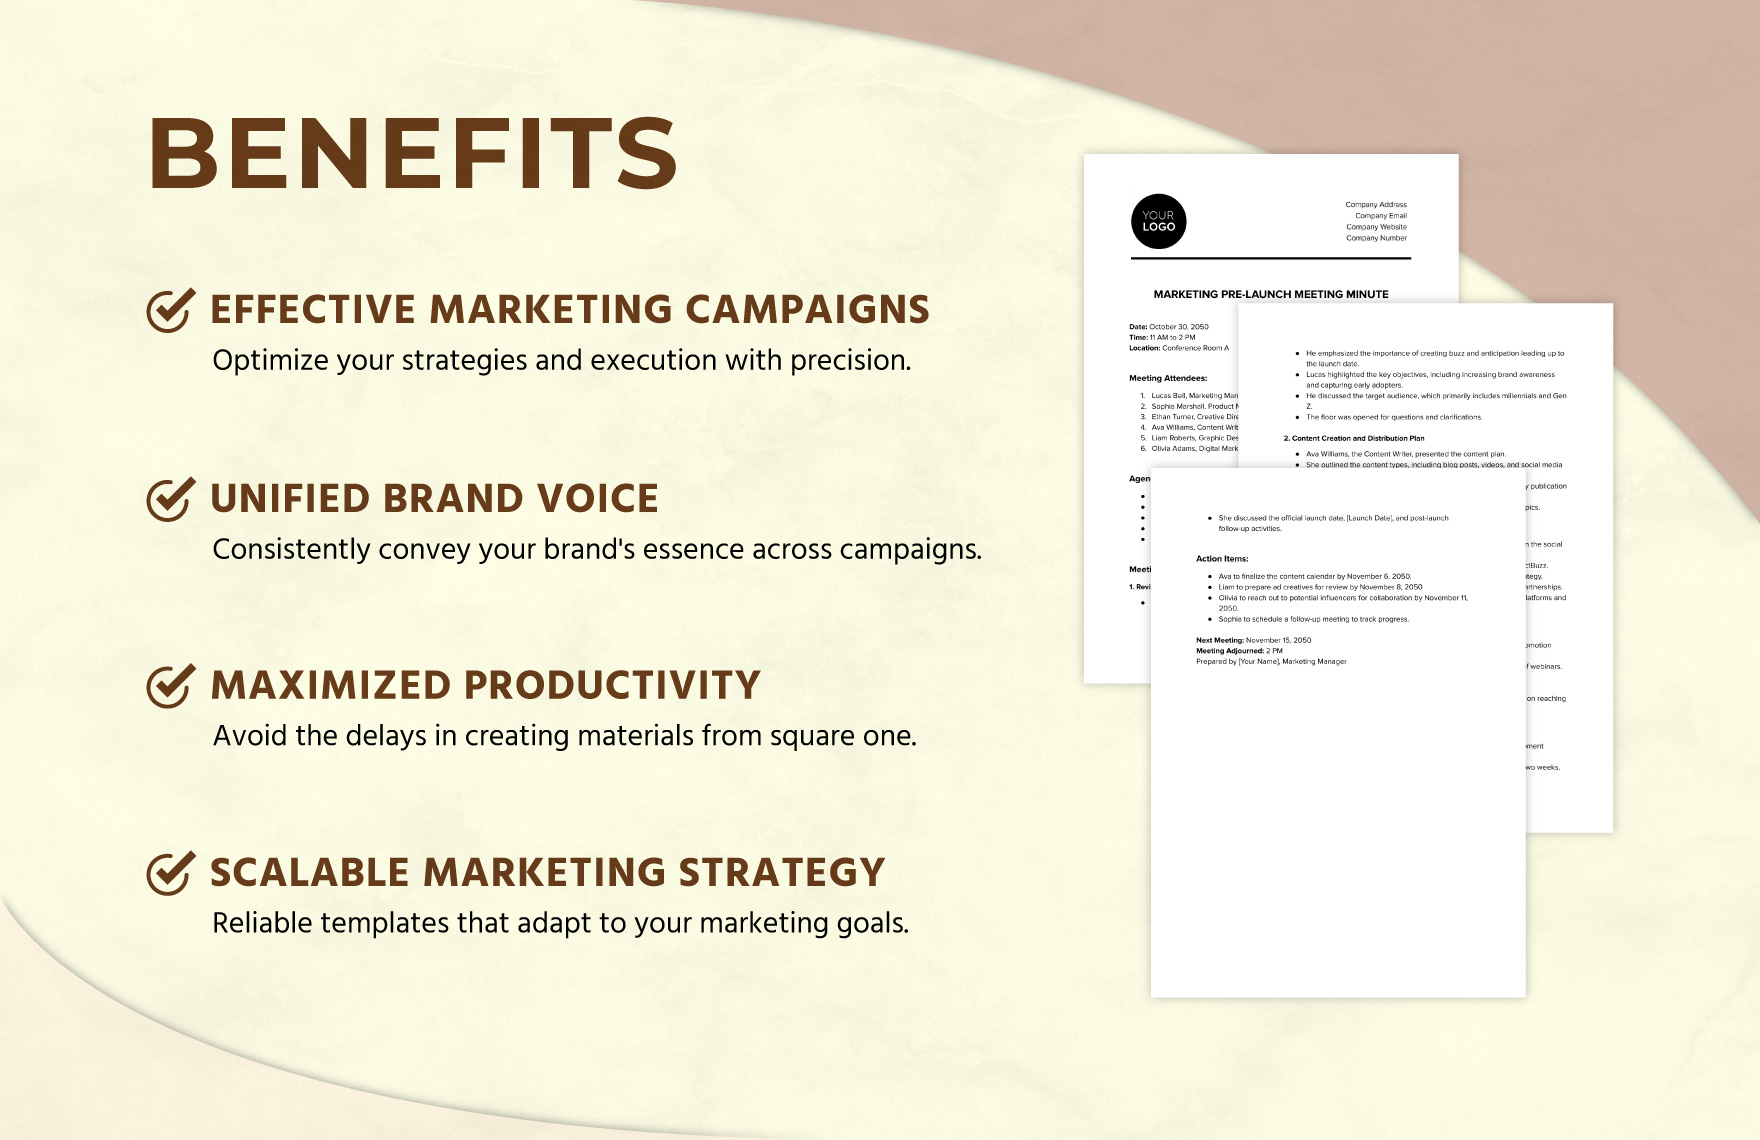 Marketing Pre-Launch Meeting Minute Template